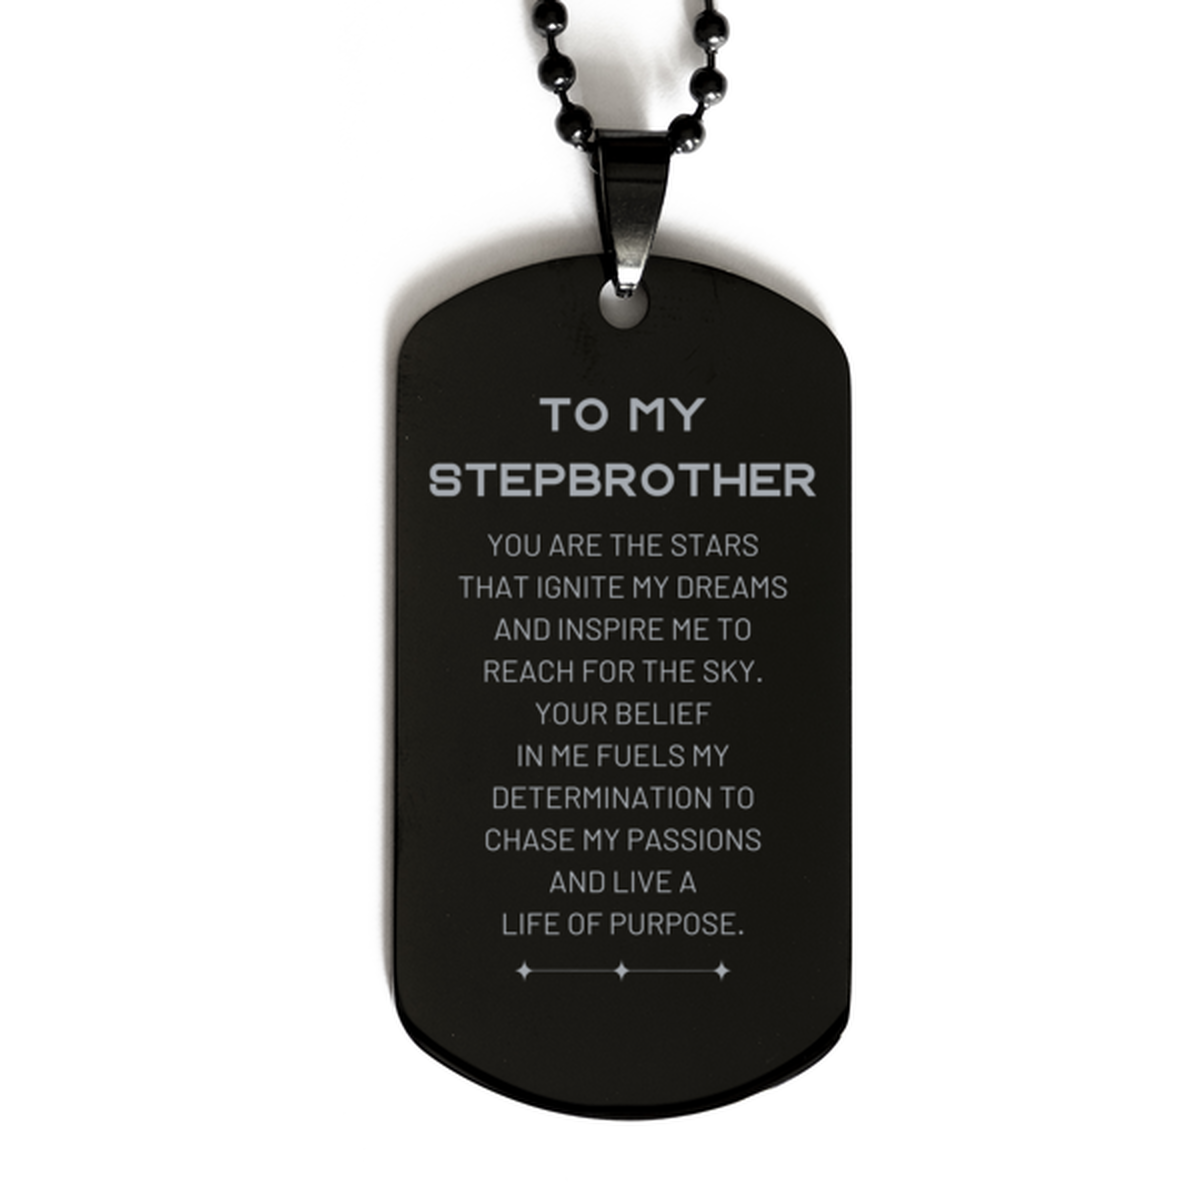 To My Stepbrother Black Dog Tag, You are the stars that ignite my dreams and inspire me to reach for the sky, Birthday Unique Gifts For Stepbrother, Thank You Gifts For Stepbrother